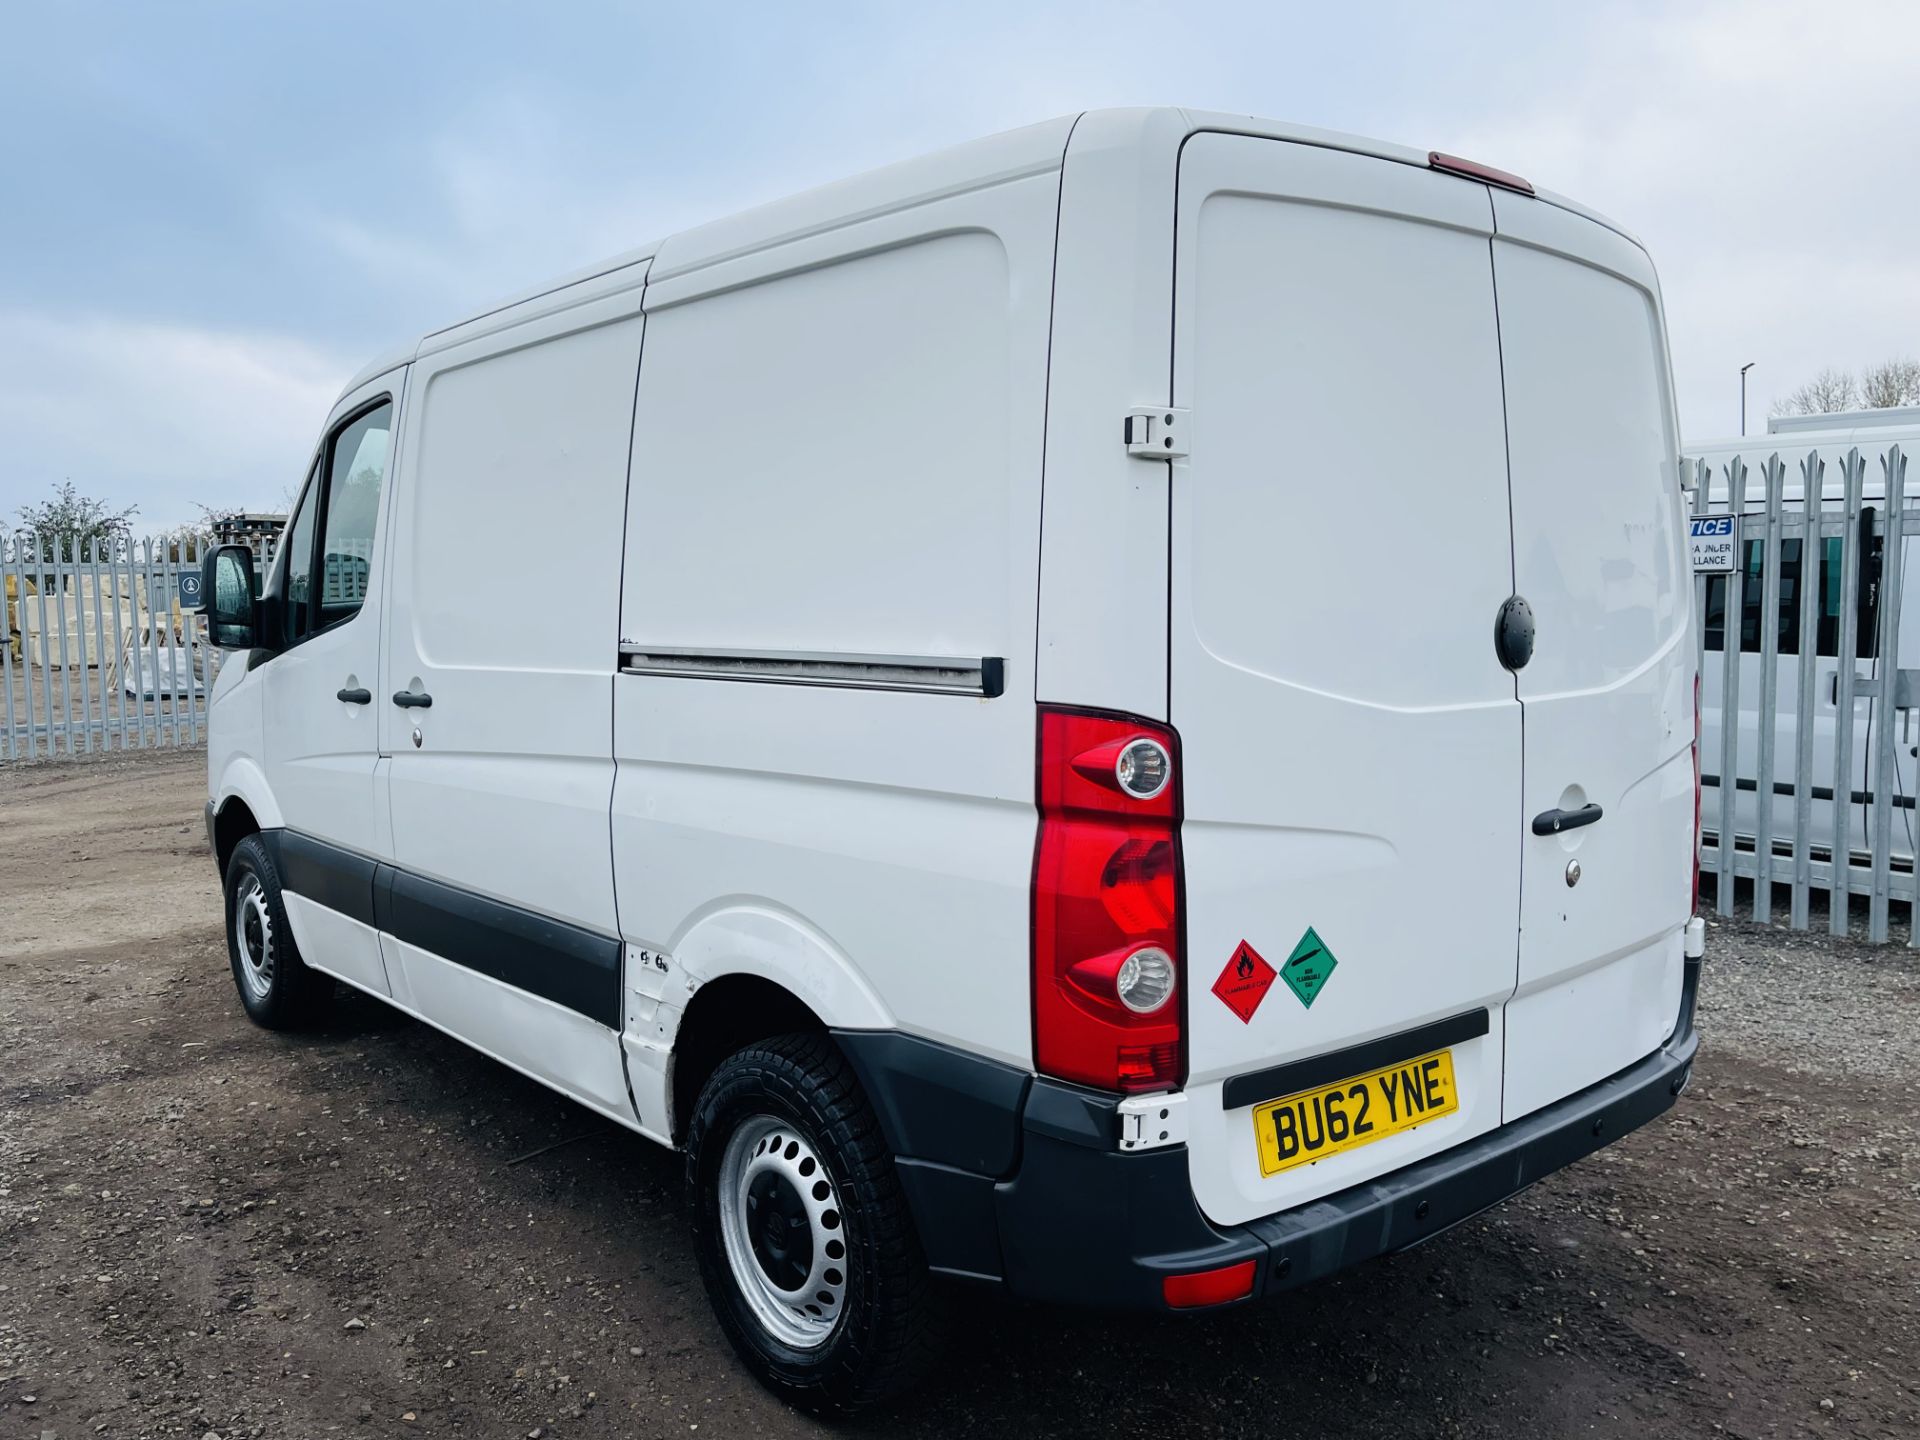 Volkswagen Crafter CR30 2.0 TDI 109 L1 H1 2012 ' 62 Reg' - Air Con - No Vat Save 20% - Image 11 of 19